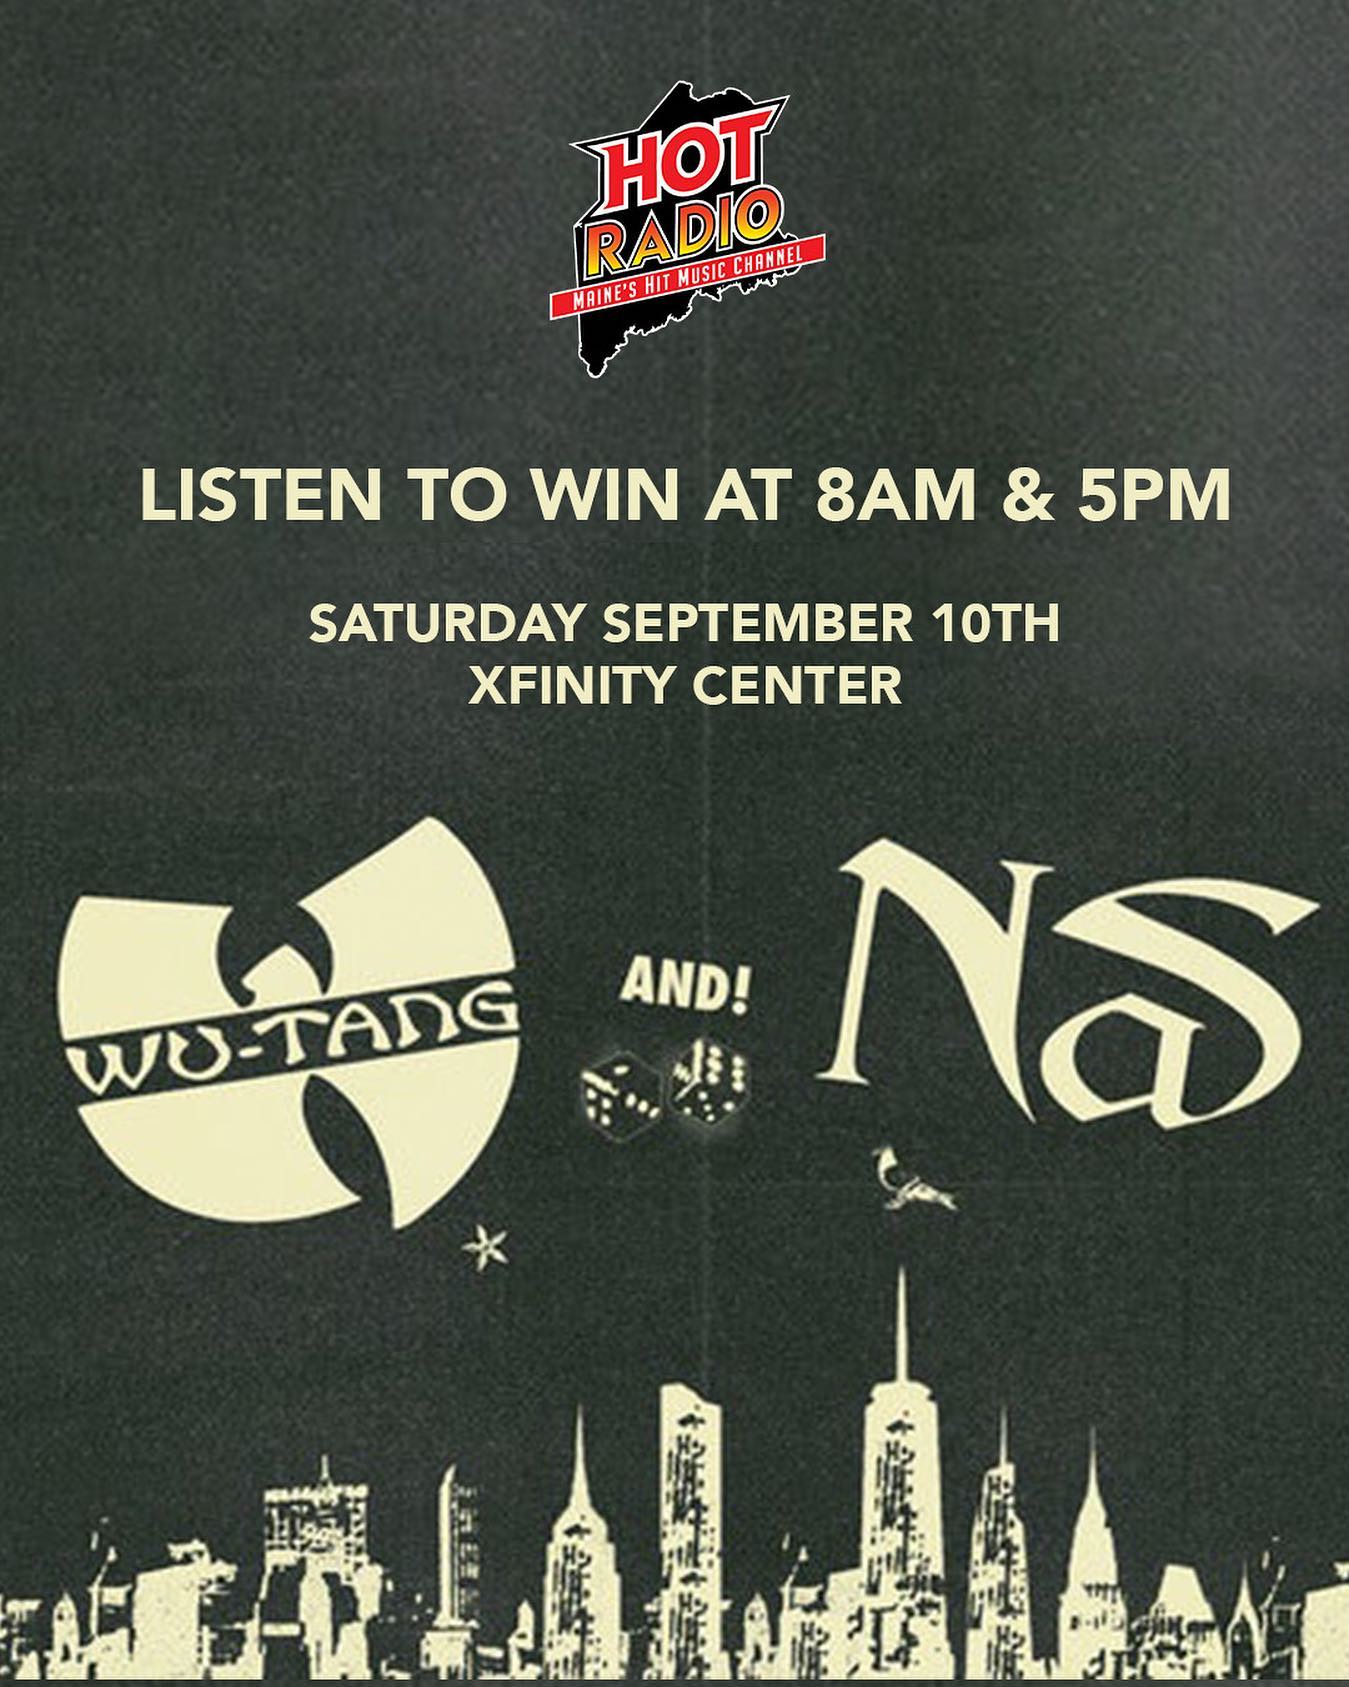 THIS WEEK win your way in to see WU-TANG & NAS.  Listen to @ryandeelon and @t_foxxi at 8am and @aullthat at 5pm.